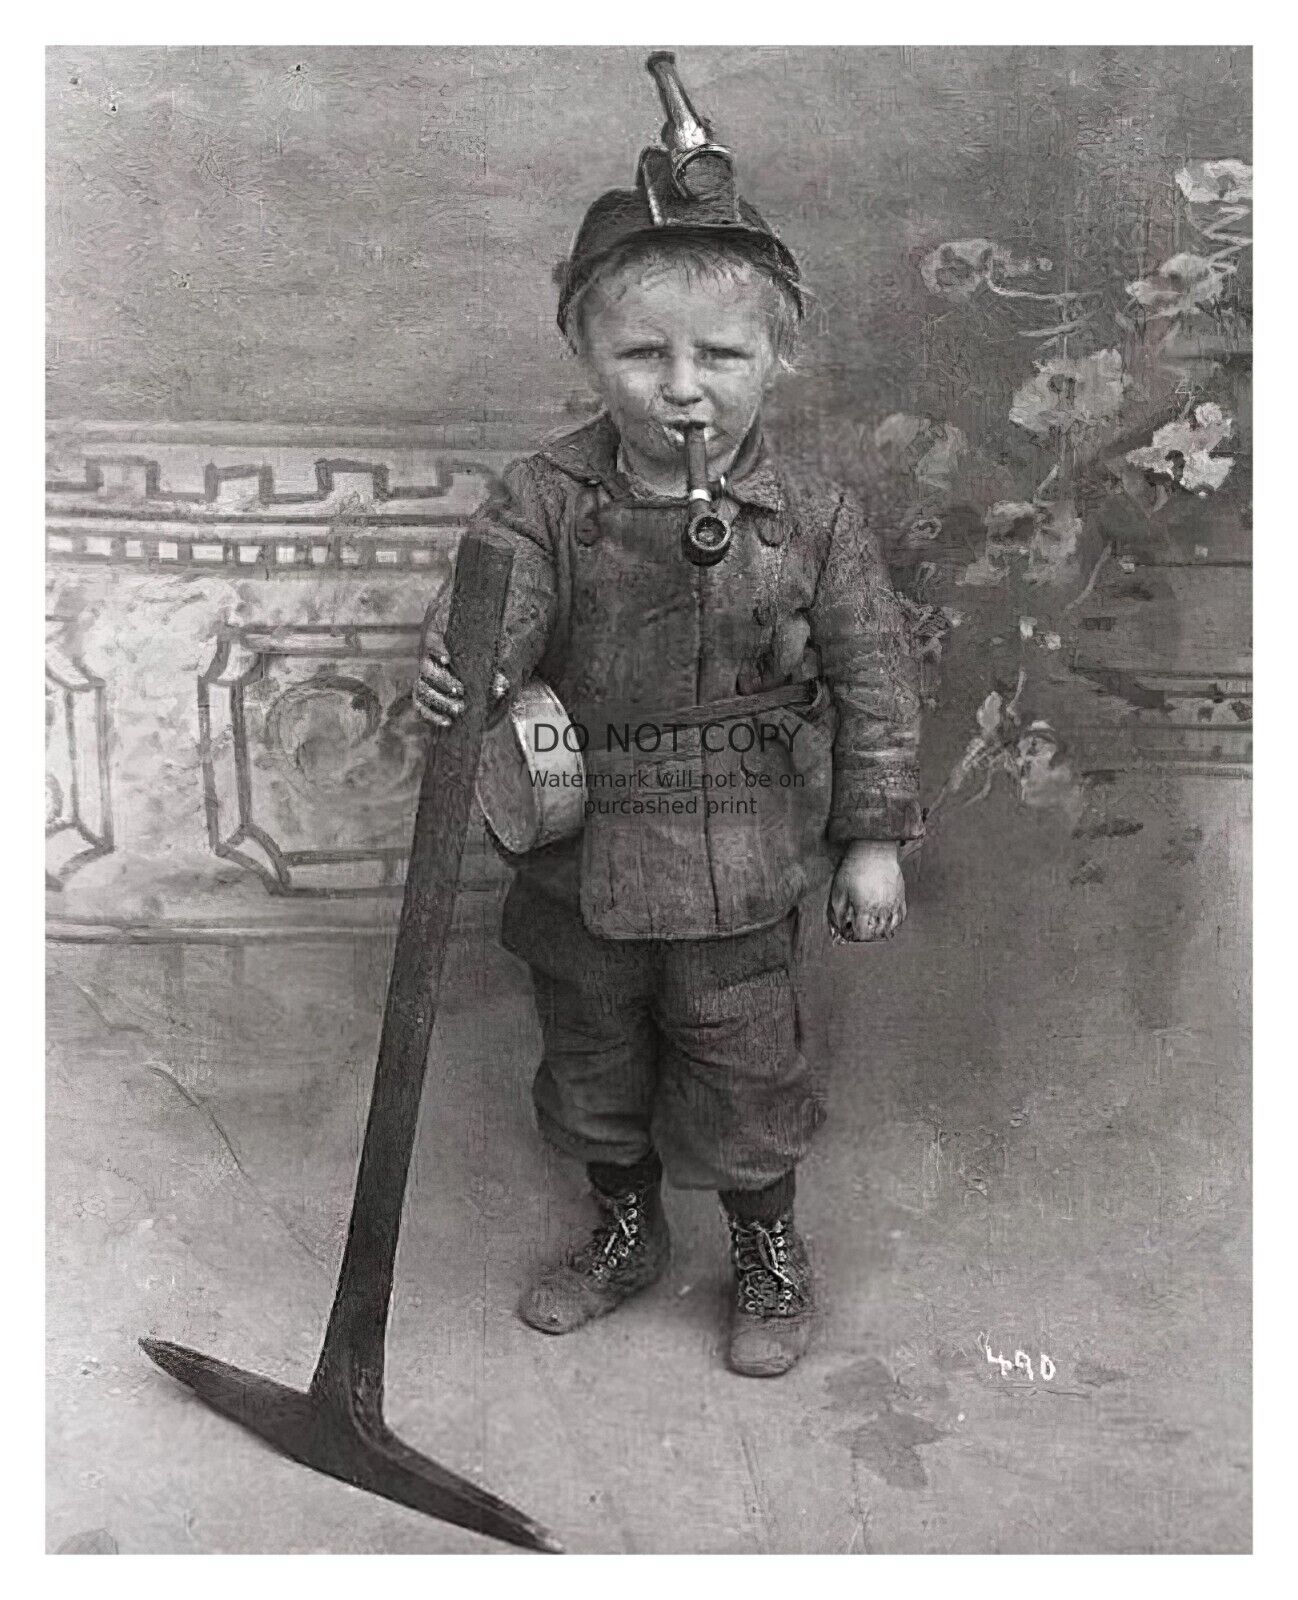 CHILD COAL MINER 8 YEARS OLD SMOKING PIPE HOLDING PICKAXE FREAK 8X10 PHOTO